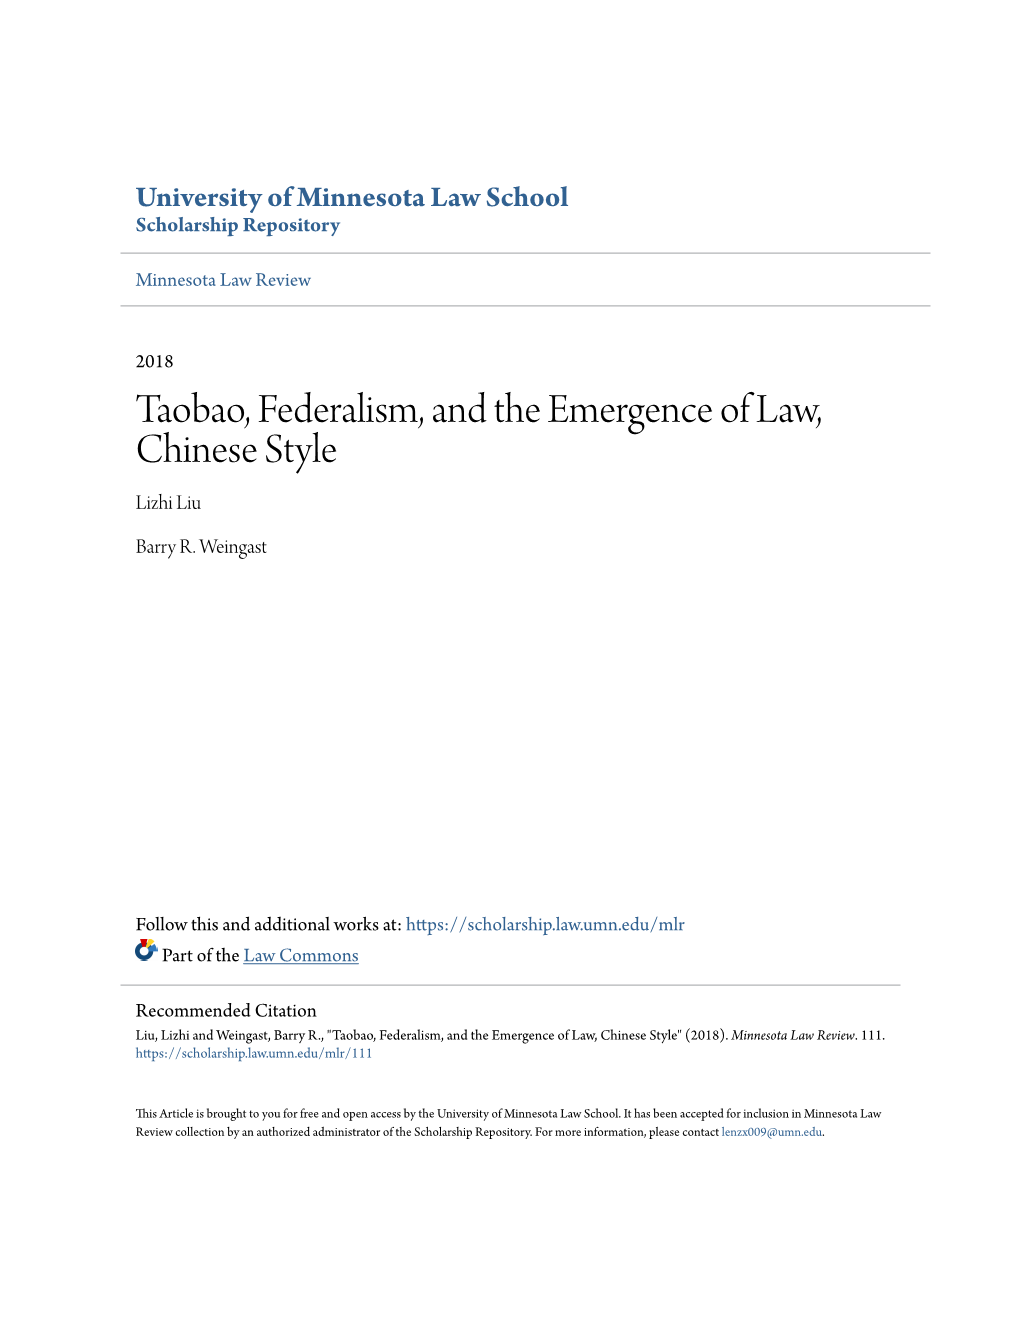 Taobao, Federalism, and the Emergence of Law, Chinese Style Lizhi Liu